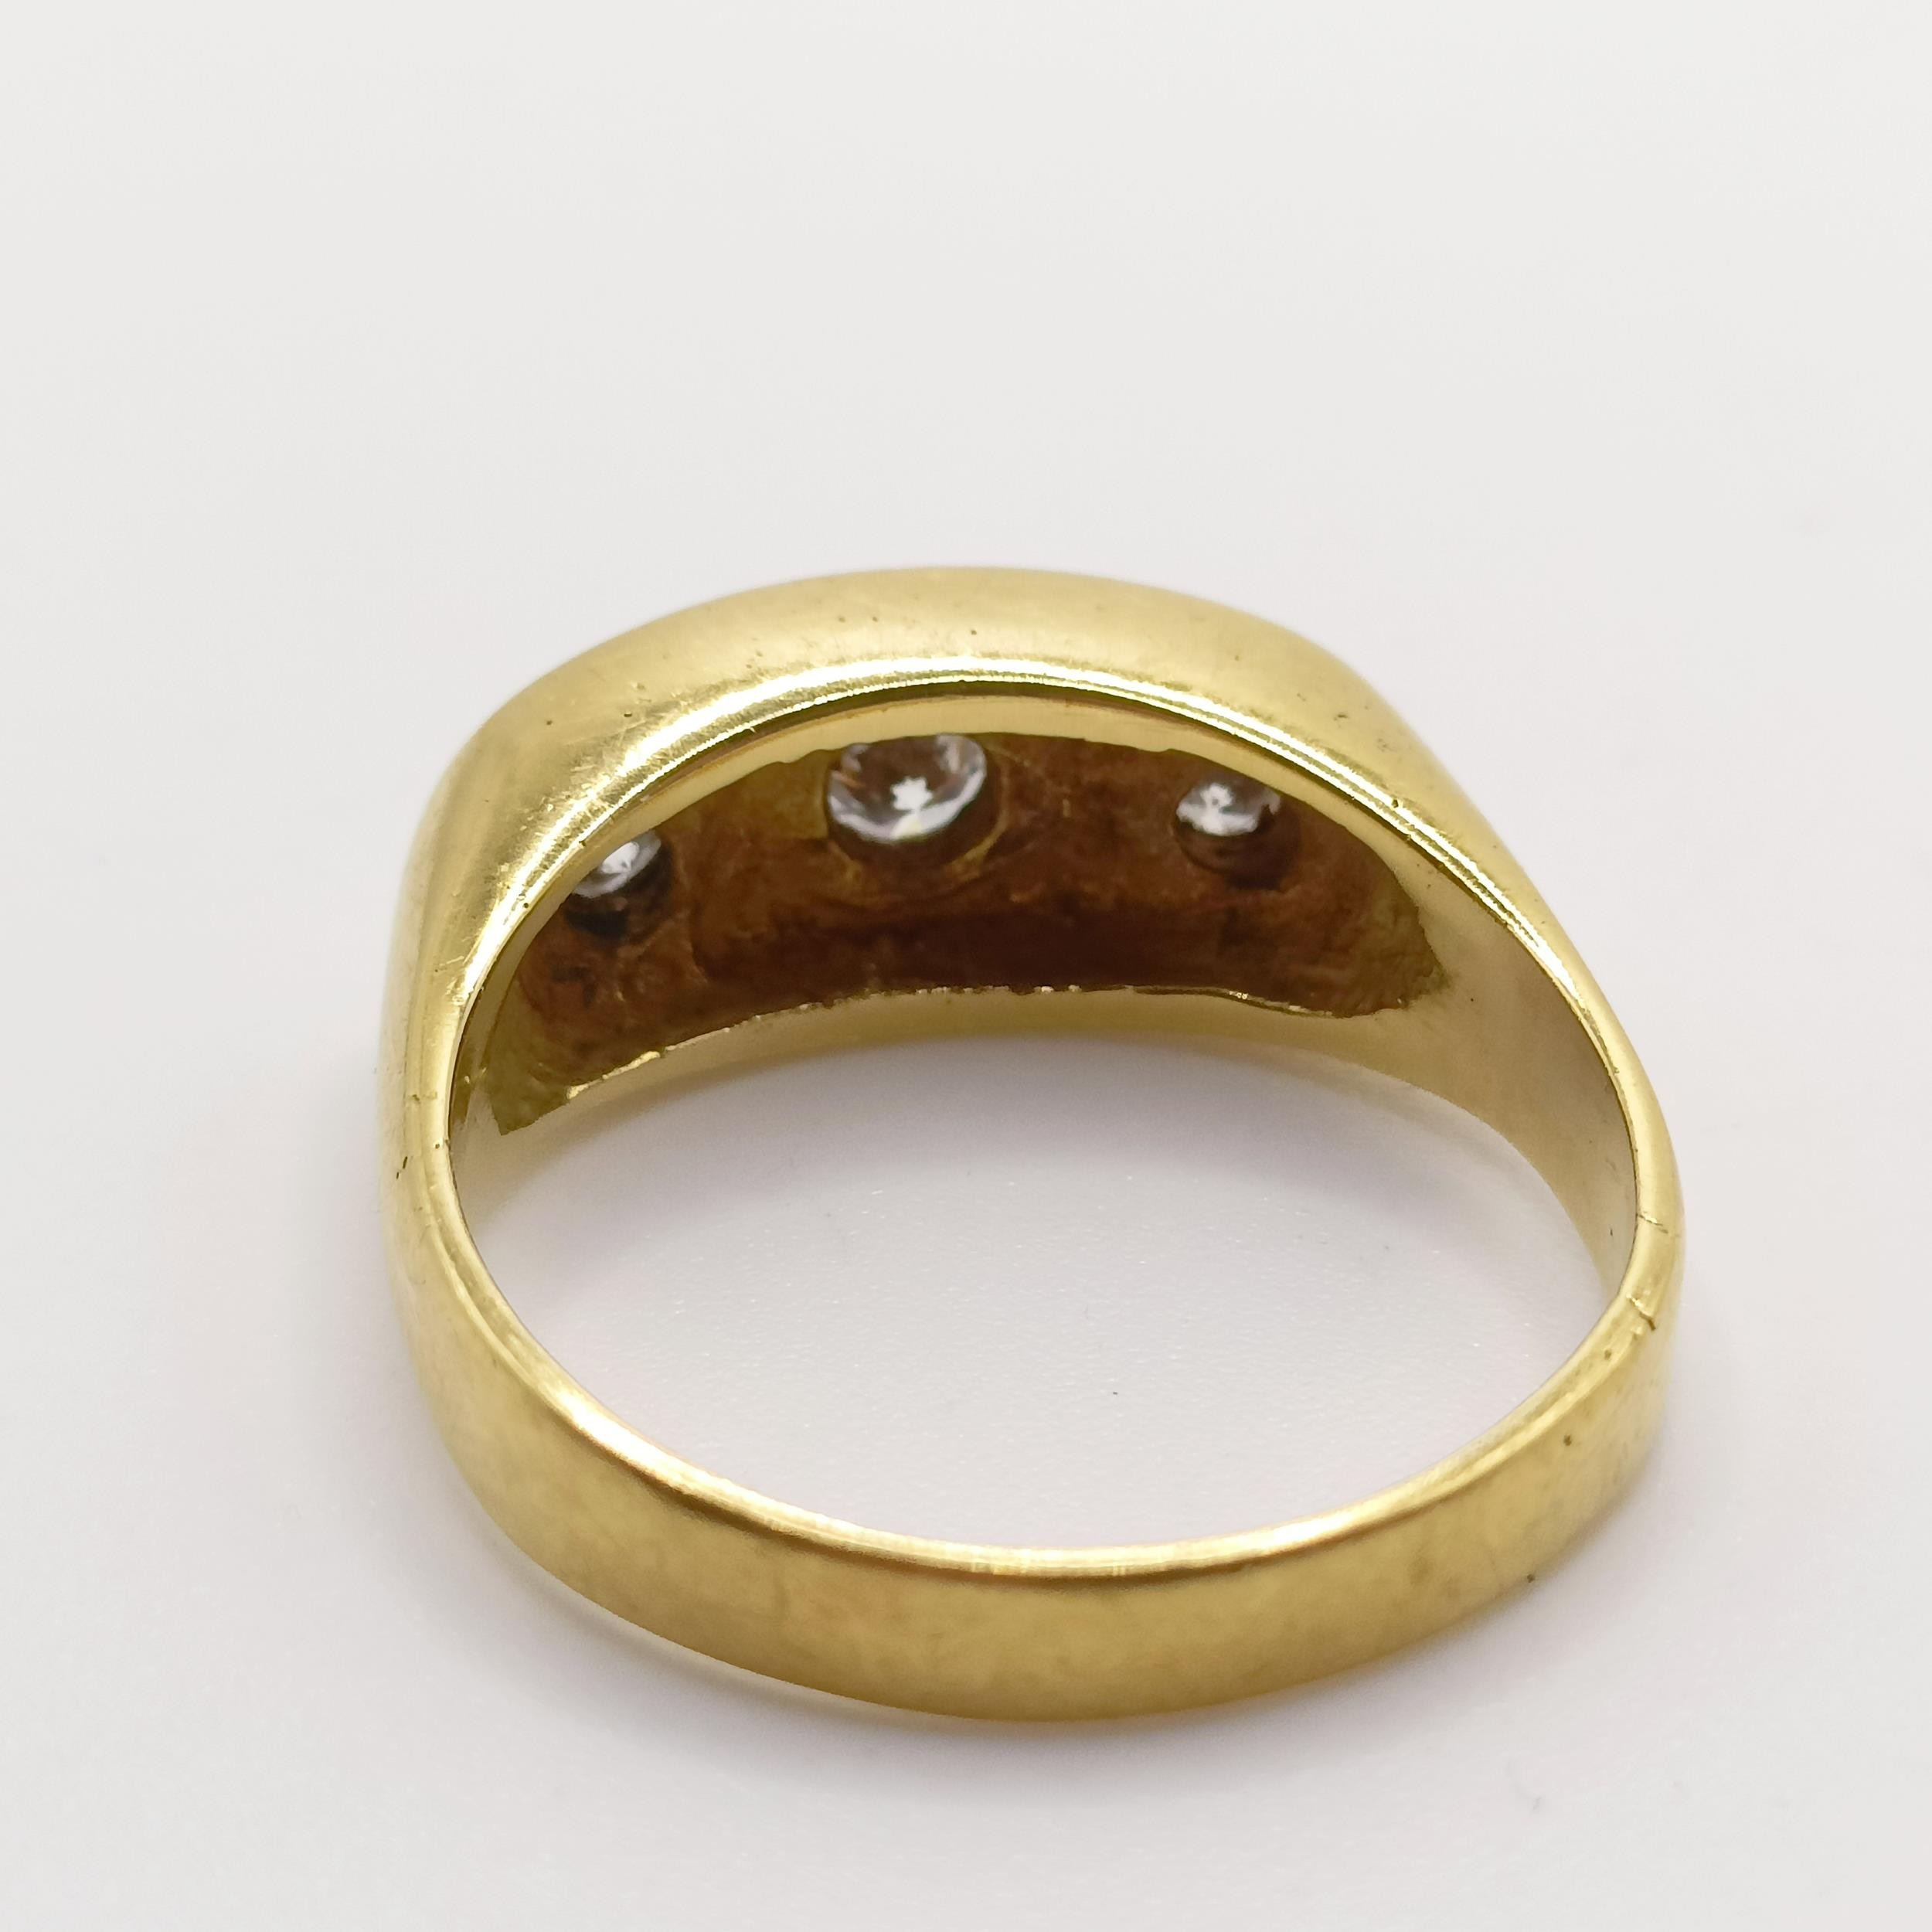 An 18ct gold three stone diamond gypsy set ring, ring size P 1/2 light ware due to use, no obvious - Image 3 of 5